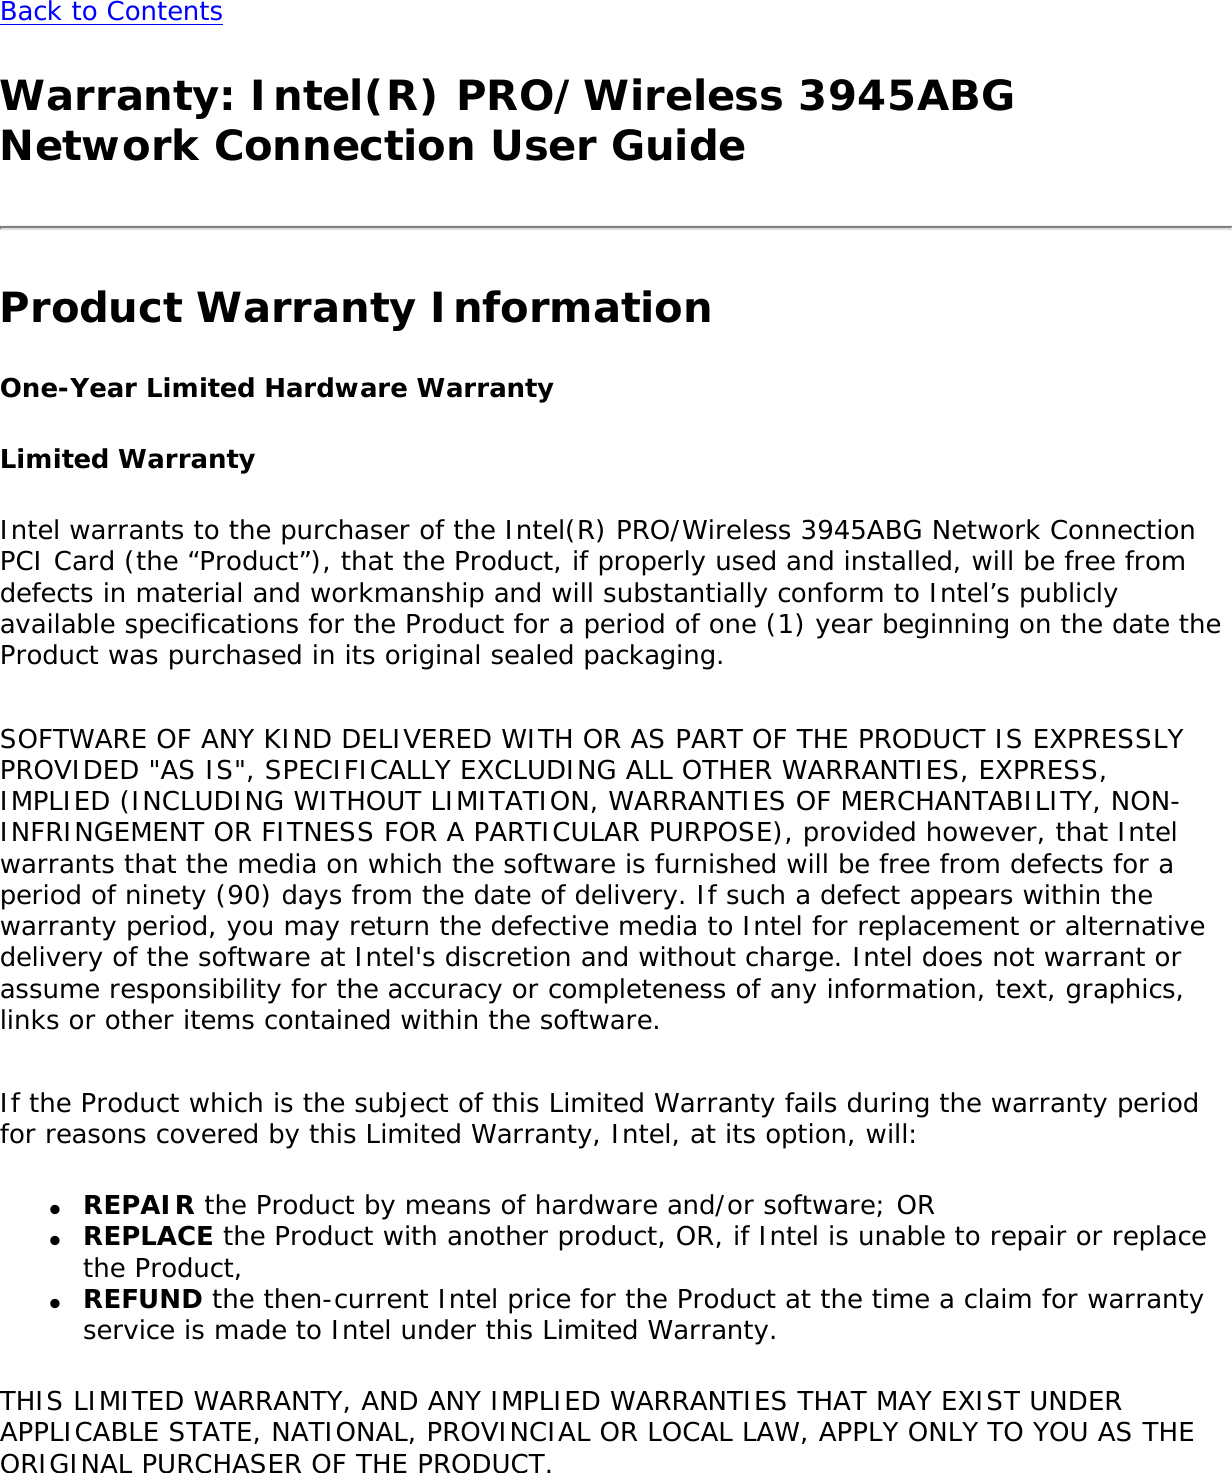 Back to Contents Warranty: Intel(R) PRO/Wireless 3945ABG Network Connection User GuideProduct Warranty InformationOne-Year Limited Hardware WarrantyLimited WarrantyIntel warrants to the purchaser of the Intel(R) PRO/Wireless 3945ABG Network Connection PCI Card (the “Product”), that the Product, if properly used and installed, will be free from defects in material and workmanship and will substantially conform to Intel’s publicly available specifications for the Product for a period of one (1) year beginning on the date the Product was purchased in its original sealed packaging.   SOFTWARE OF ANY KIND DELIVERED WITH OR AS PART OF THE PRODUCT IS EXPRESSLY PROVIDED &quot;AS IS&quot;, SPECIFICALLY EXCLUDING ALL OTHER WARRANTIES, EXPRESS, IMPLIED (INCLUDING WITHOUT LIMITATION, WARRANTIES OF MERCHANTABILITY, NON-INFRINGEMENT OR FITNESS FOR A PARTICULAR PURPOSE), provided however, that Intel warrants that the media on which the software is furnished will be free from defects for a period of ninety (90) days from the date of delivery. If such a defect appears within the warranty period, you may return the defective media to Intel for replacement or alternative delivery of the software at Intel&apos;s discretion and without charge. Intel does not warrant or assume responsibility for the accuracy or completeness of any information, text, graphics, links or other items contained within the software.    If the Product which is the subject of this Limited Warranty fails during the warranty period for reasons covered by this Limited Warranty, Intel, at its option, will: ●     REPAIR the Product by means of hardware and/or software; OR●     REPLACE the Product with another product, OR, if Intel is unable to repair or replace the Product, ●     REFUND the then-current Intel price for the Product at the time a claim for warranty service is made to Intel under this Limited Warranty.THIS LIMITED WARRANTY, AND ANY IMPLIED WARRANTIES THAT MAY EXIST UNDER APPLICABLE STATE, NATIONAL, PROVINCIAL OR LOCAL LAW, APPLY ONLY TO YOU AS THE ORIGINAL PURCHASER OF THE PRODUCT. 